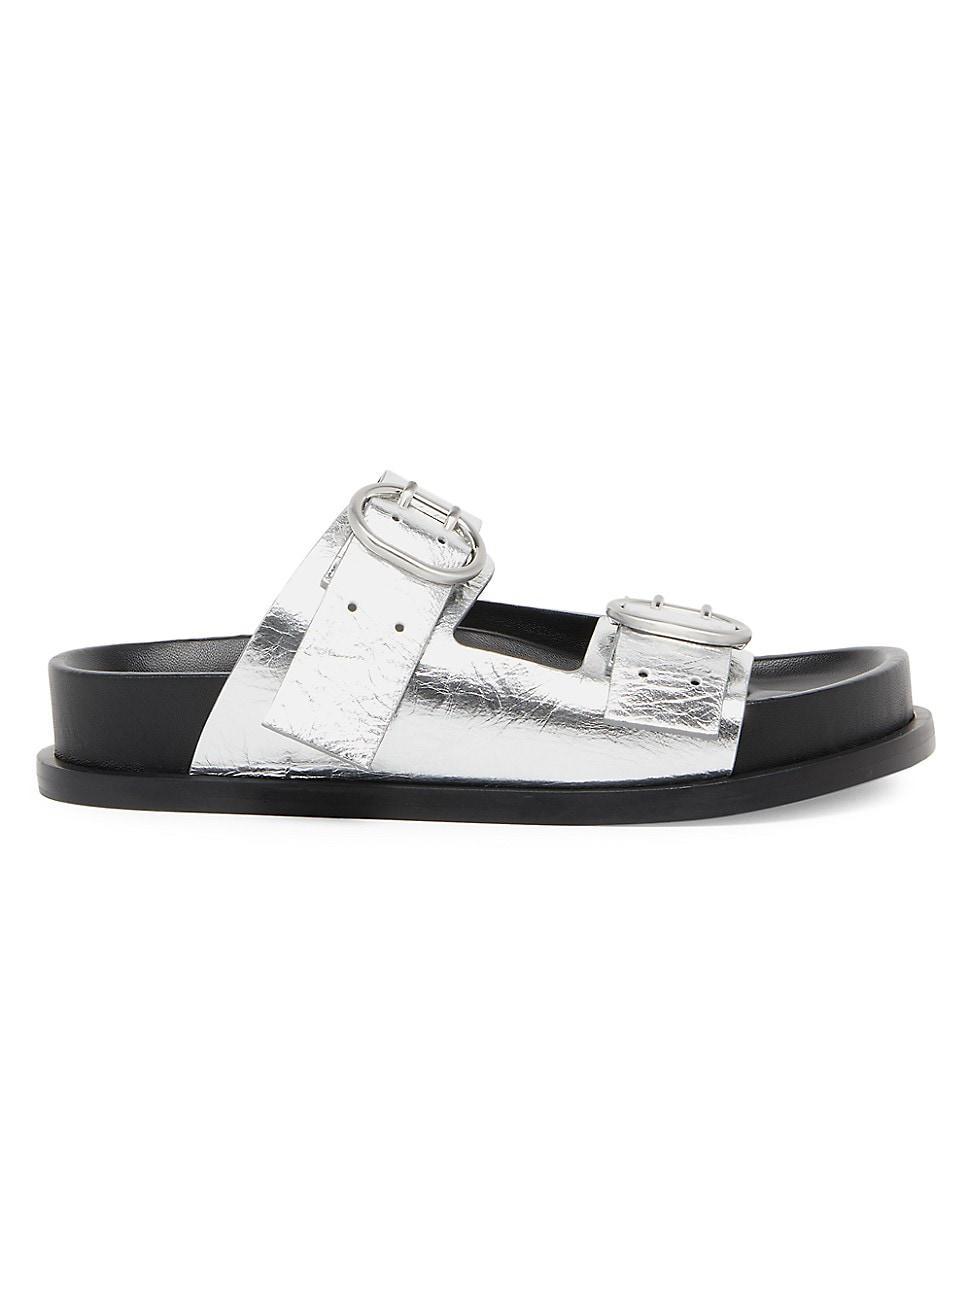 Womens Metallic Leather Double Buckle Sandals Product Image